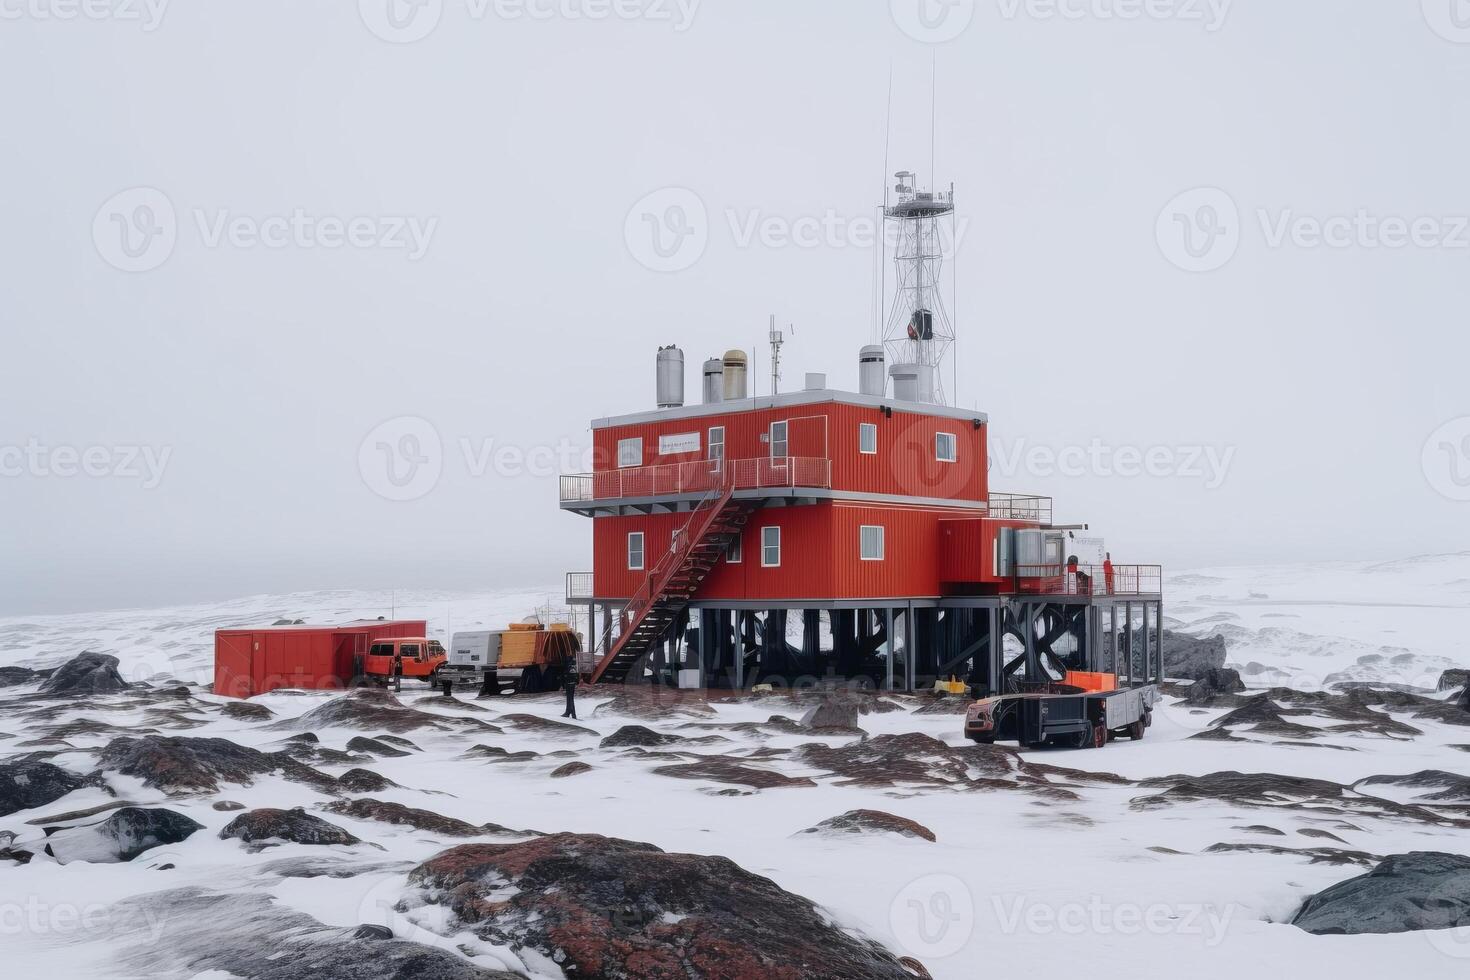 Image of Antarctica science station photo